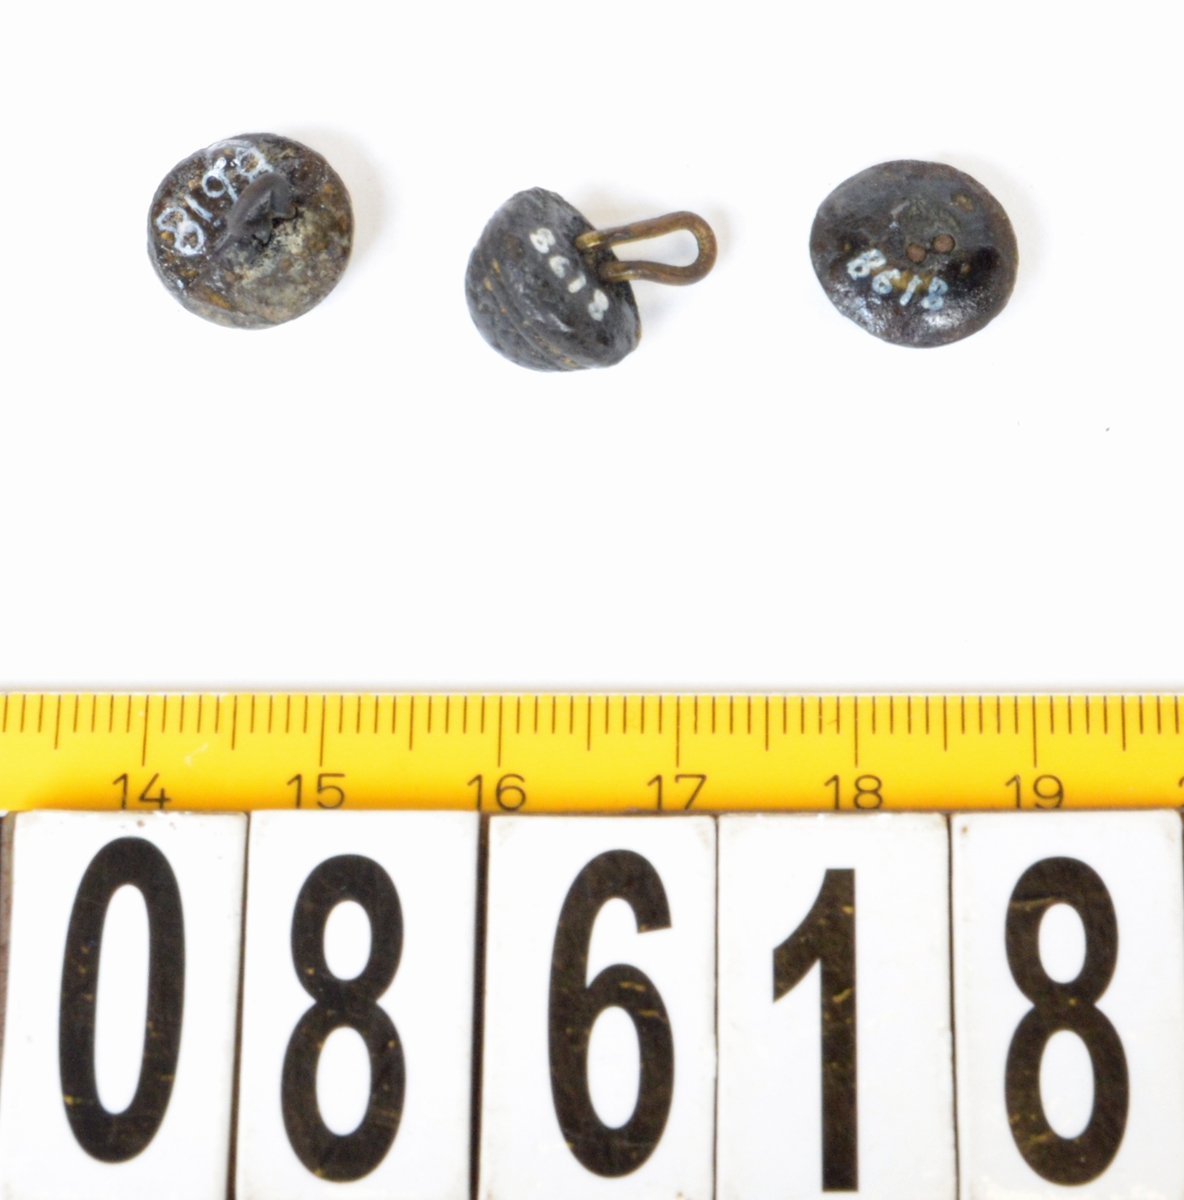 Skoknappar, 3 stycken av mässing.
2 med ögla, 1 utan. Ornering på knapphuvud (varierande).

Text in English: Three decorated metal buttons.  Two with similar but different patterns.  All are half-sphere shape with almost flat bottoms.  Two have wire shanks, one is missing.
First pattern is a lattice.  Six lines are woven together and each space between is filled with five dots. This button has a wire shank that is cast in far offcenter.
The second button has a flower at the top in the center with a circle around it.  Under this is a pattern that is too worn to be accurately described, but appears to be a four-repeat swoop pattern.  The wire shank is cast into the head, and is severely bent to one side.
The third button has a five-petal flower in the center at the top with a circle around it.  The pattern below it is a five-repeat pattern of opposing "C"s, connected by a line in the center and with dots above and below the line.  There is no shank, but holes in the bottom indicate there was probably a wire shank at one time.